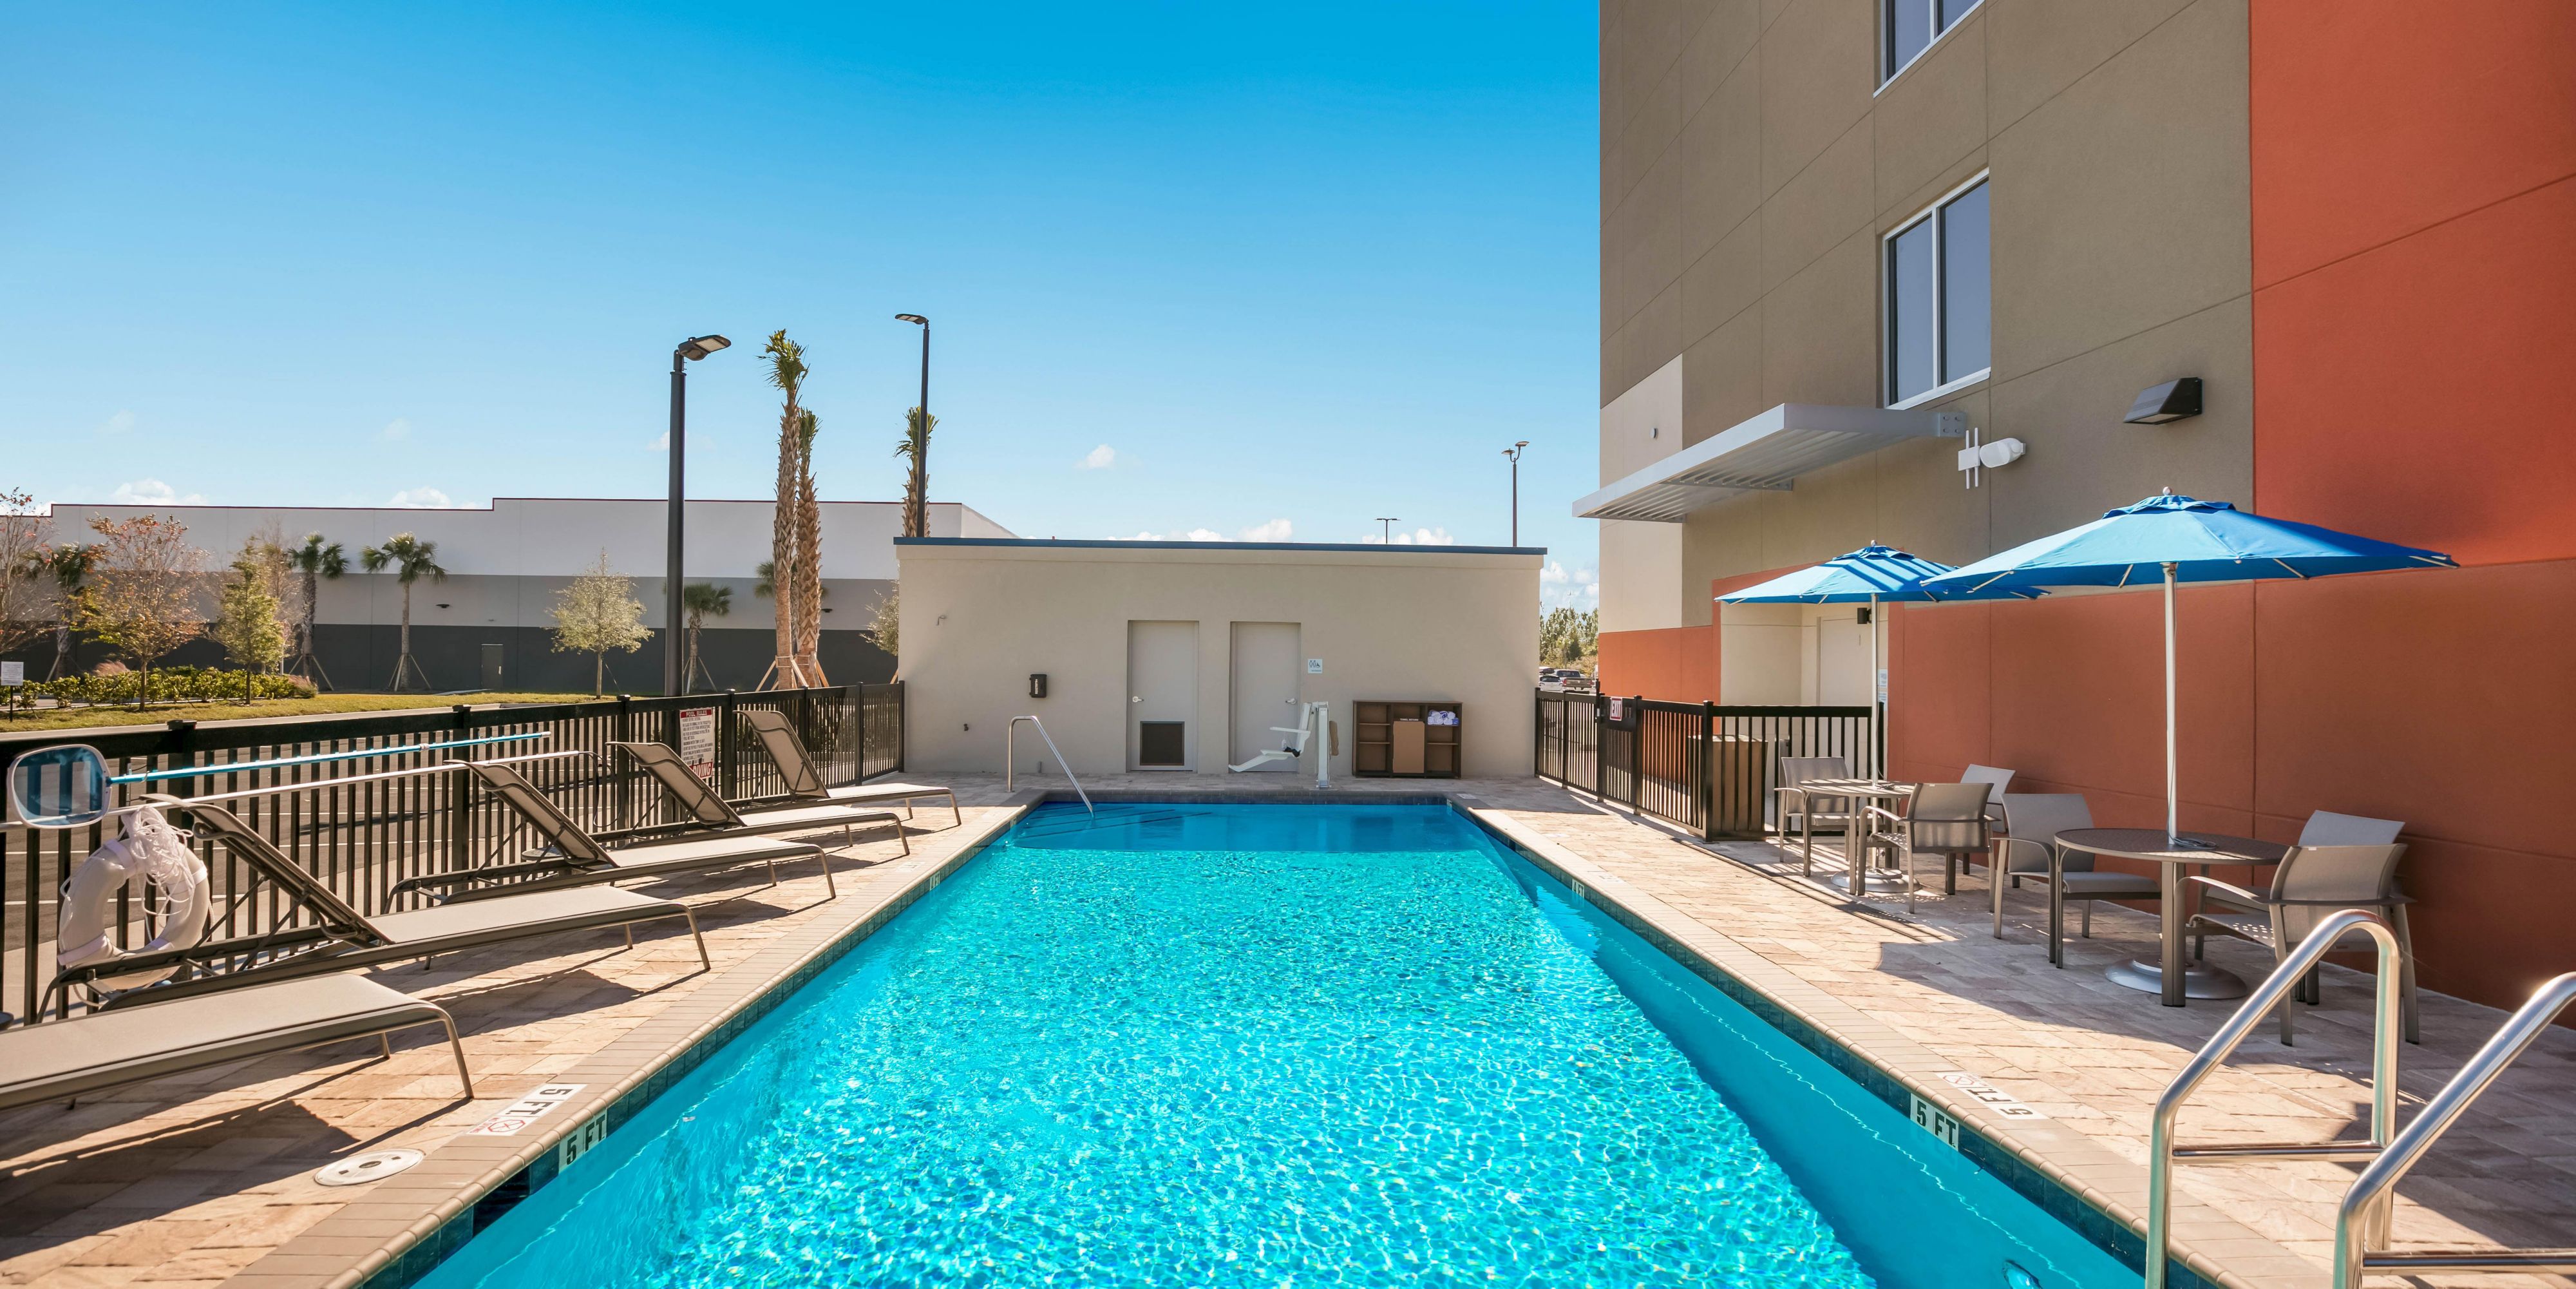 Beat the heat this summer, and take a dip in our outdoor pool for a refreshing morning swim or relax on a lounge chair after a day of business meetings or exploring Jacksonville. Our outdoor pool is open between 7am to 10pm.